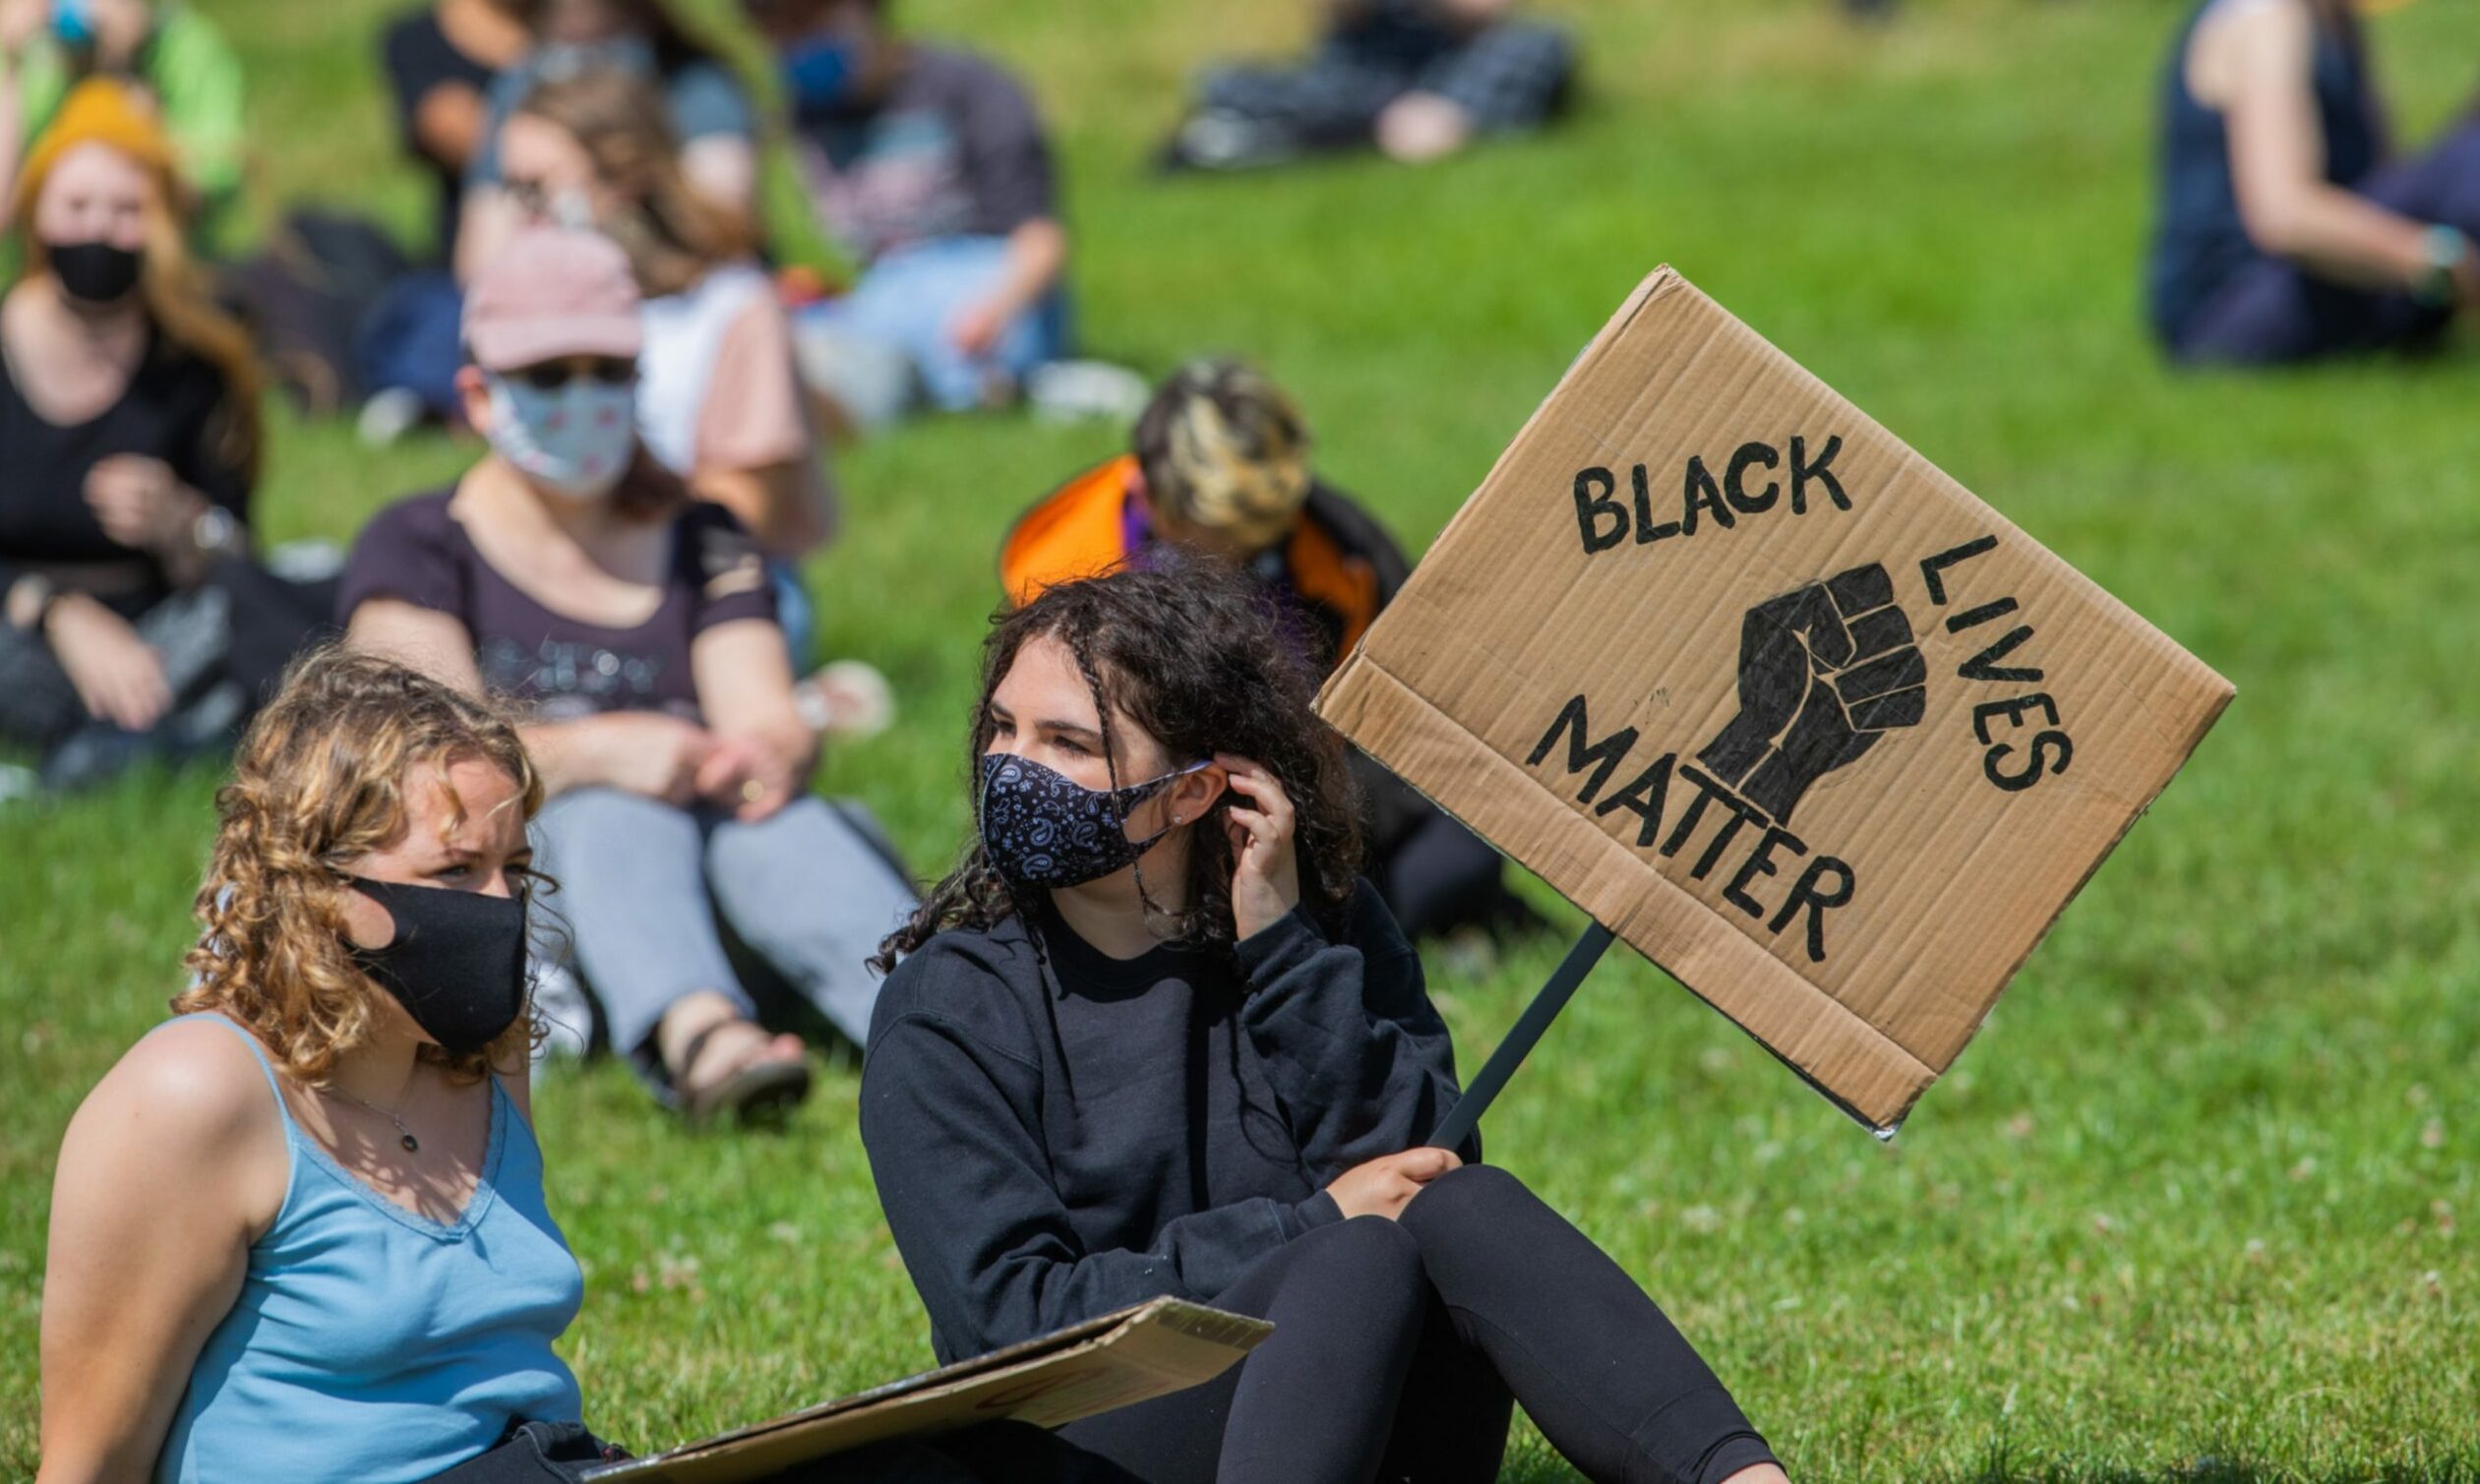 Black Lives Matter protest took place at Magdalen Green, Dundee, in July 2020.